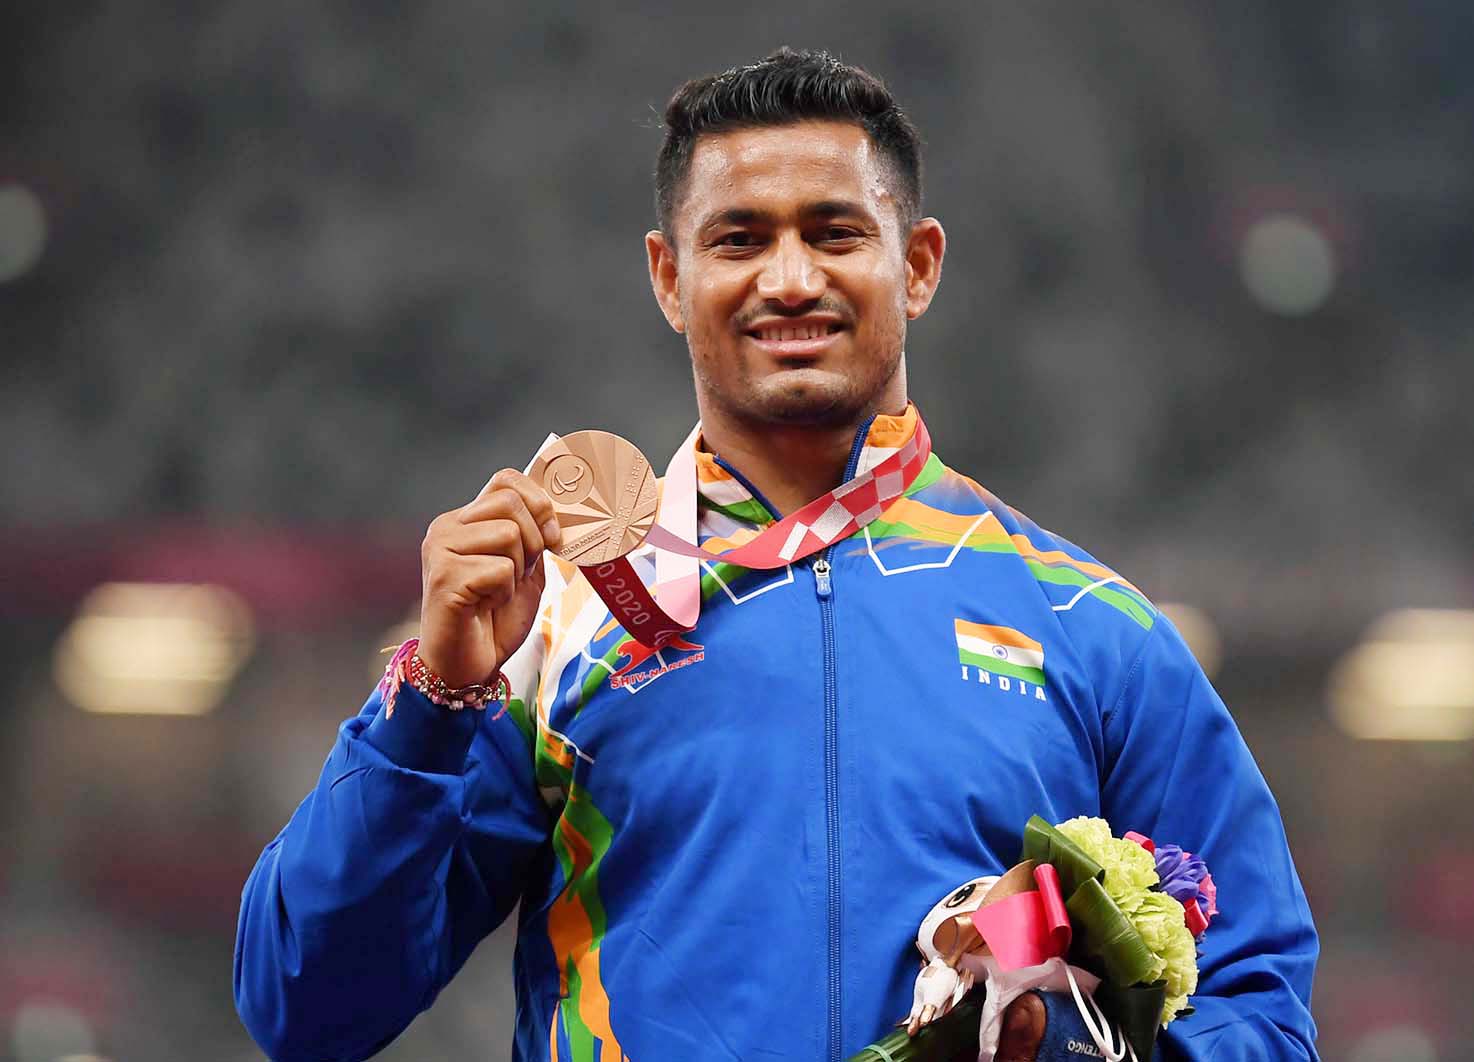 Indian javelin thrower Sundar Singh Gurjar with his bronze medal at the Tokyo Paralympics on 30 August 2021.